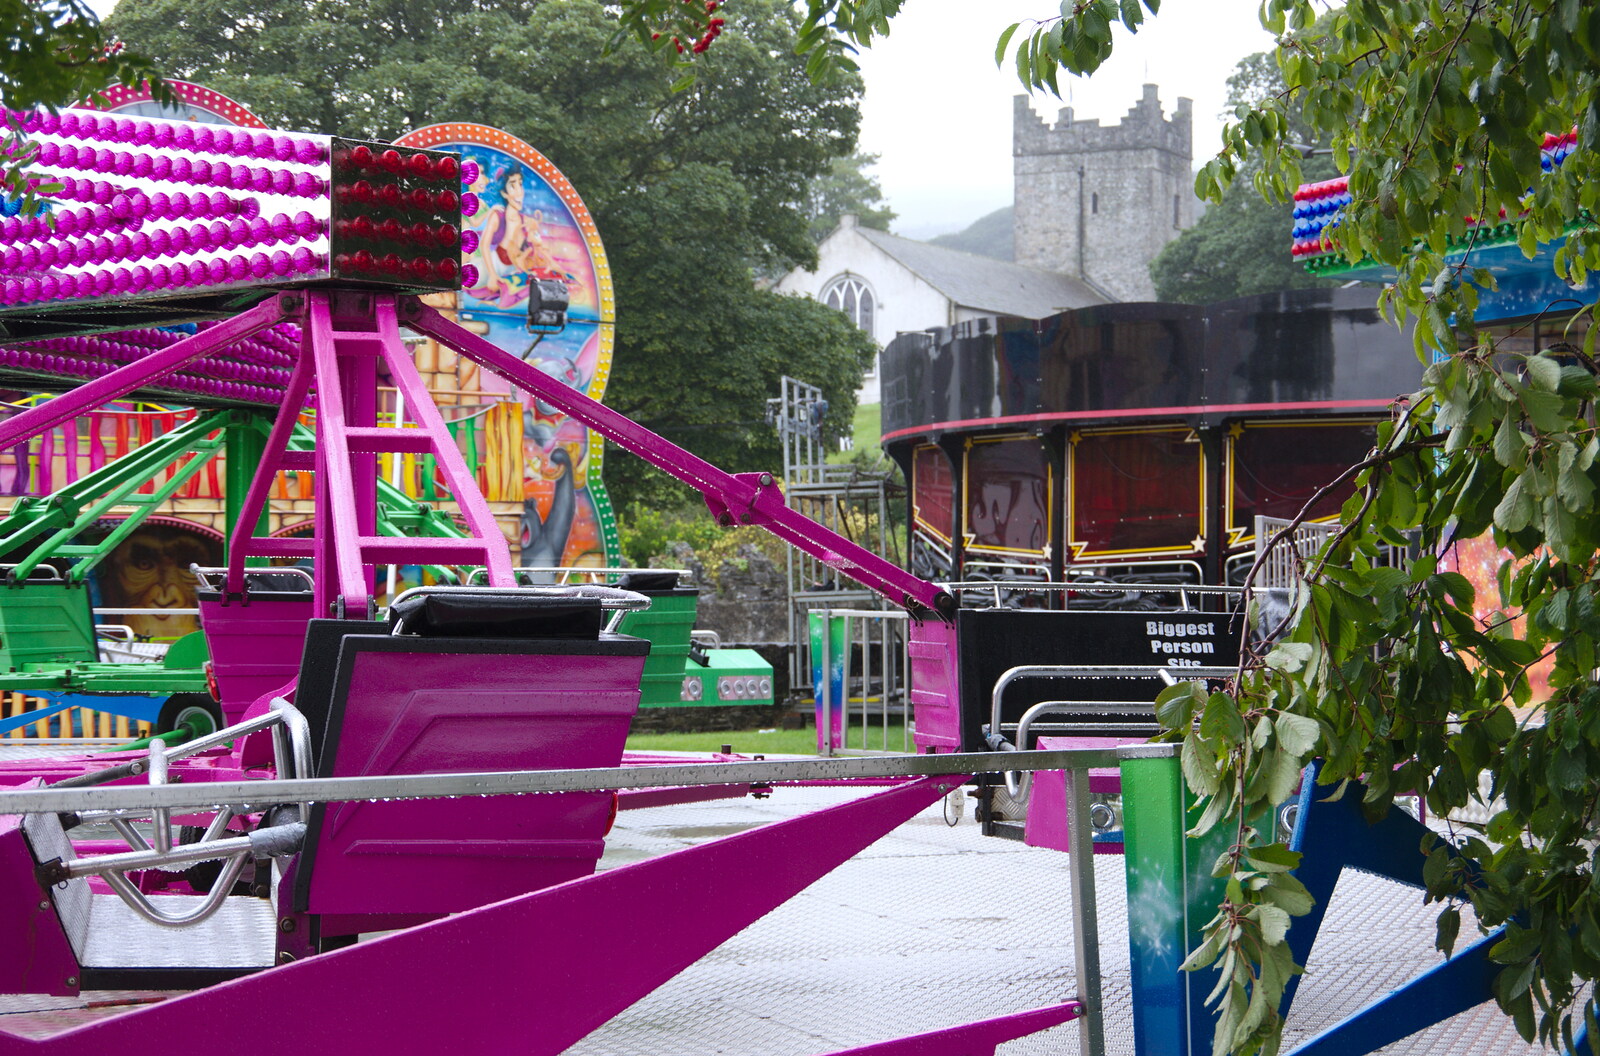 A fairground ride in the rain from The Giant's Causeway, Bushmills, County Antrim, Northern Ireland - 14th August 2019